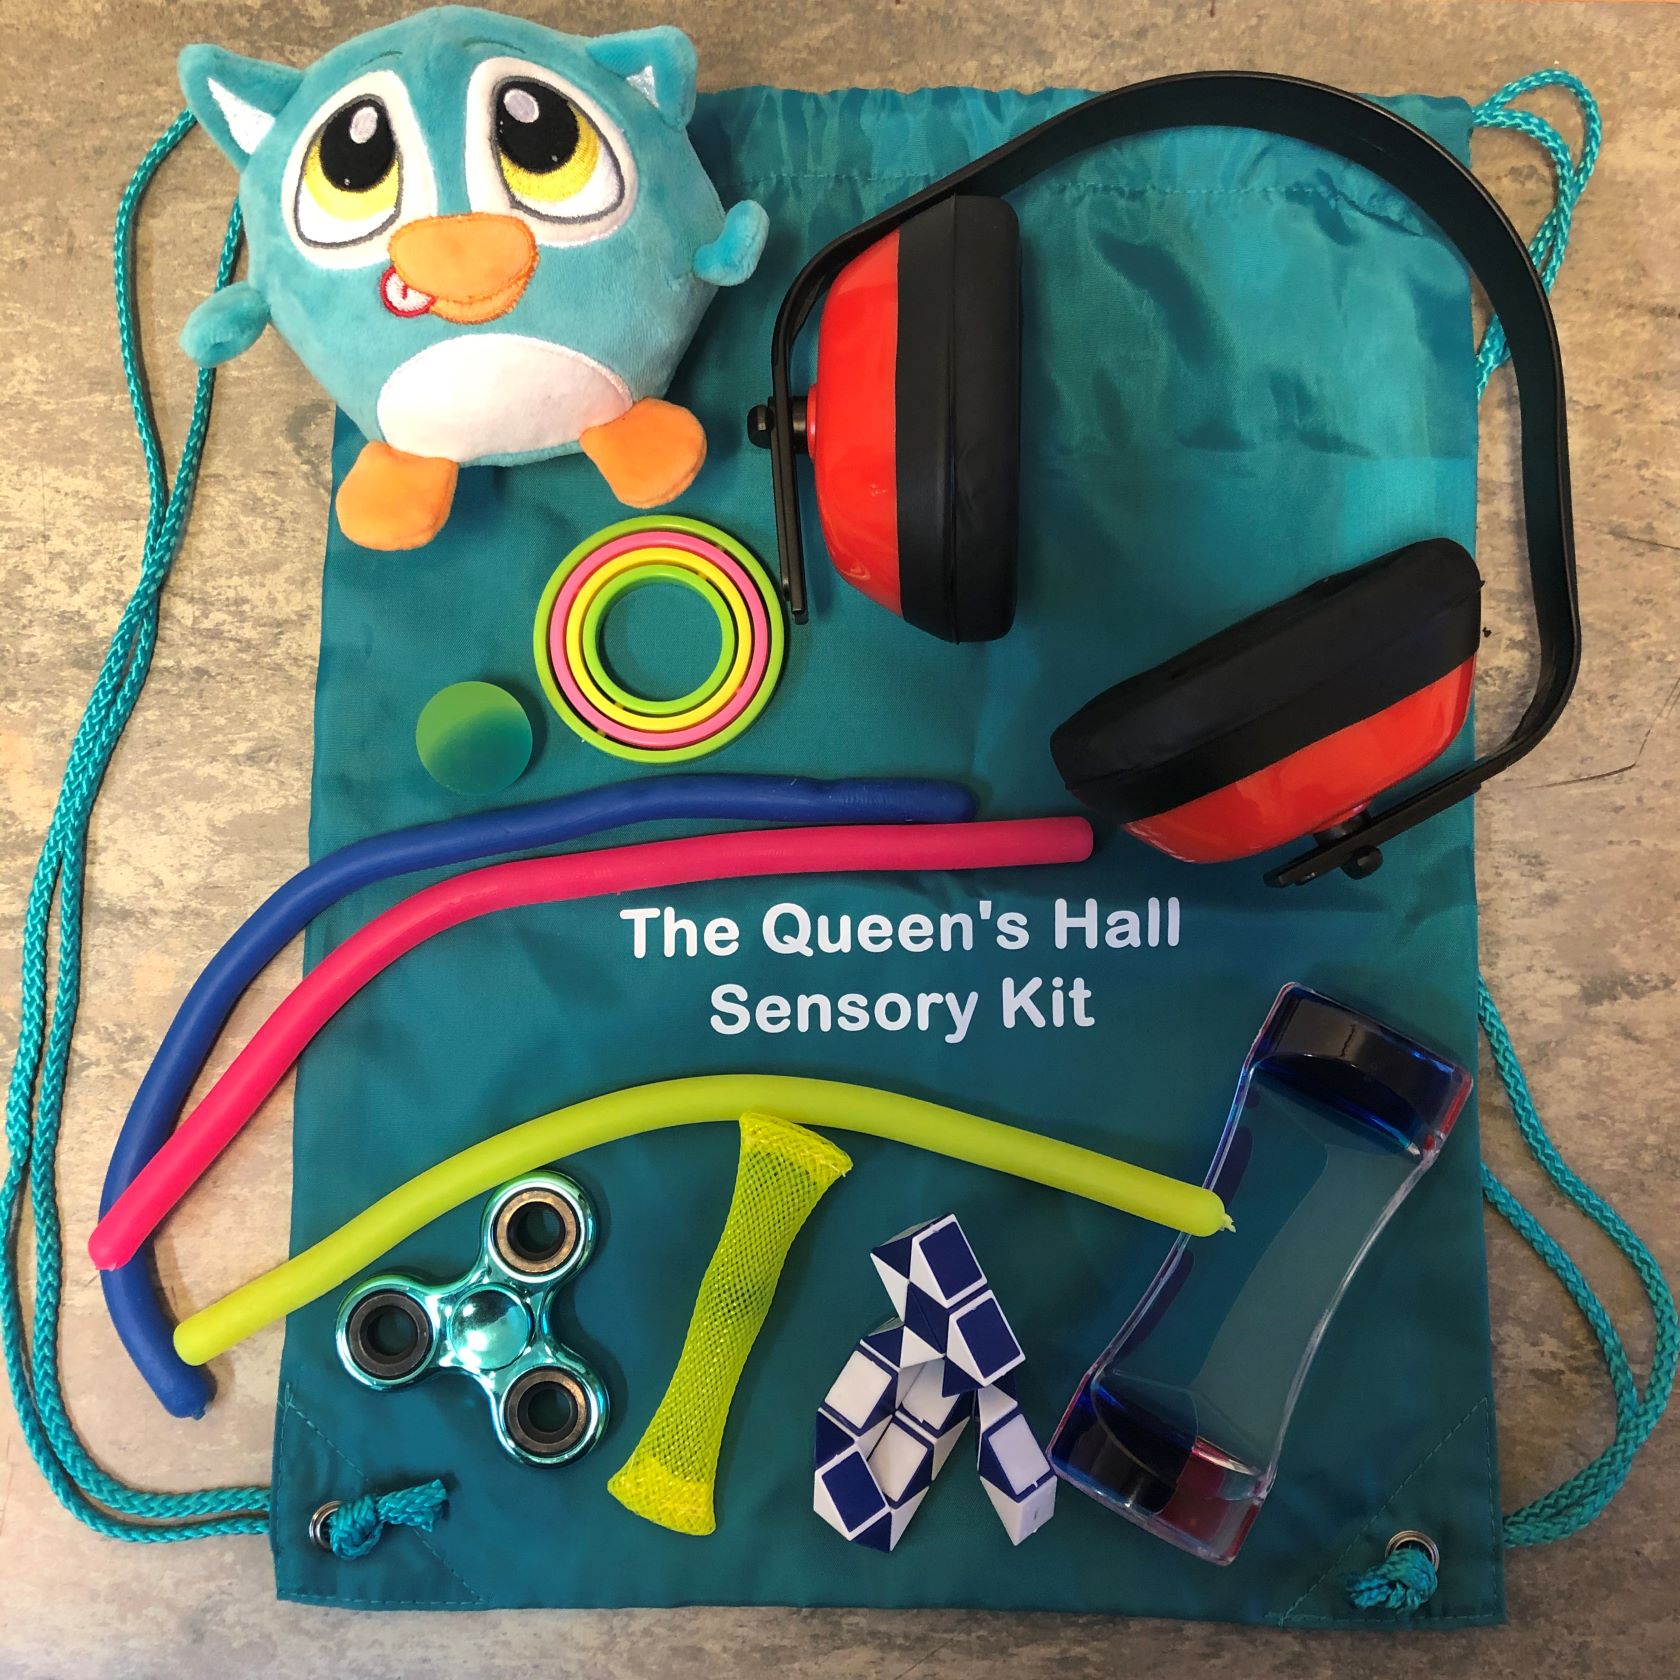 A green bag saying The Queen's Hall Sensory Kit with its contents lying on top which include ear defenders, a soft toy and fidge spinners